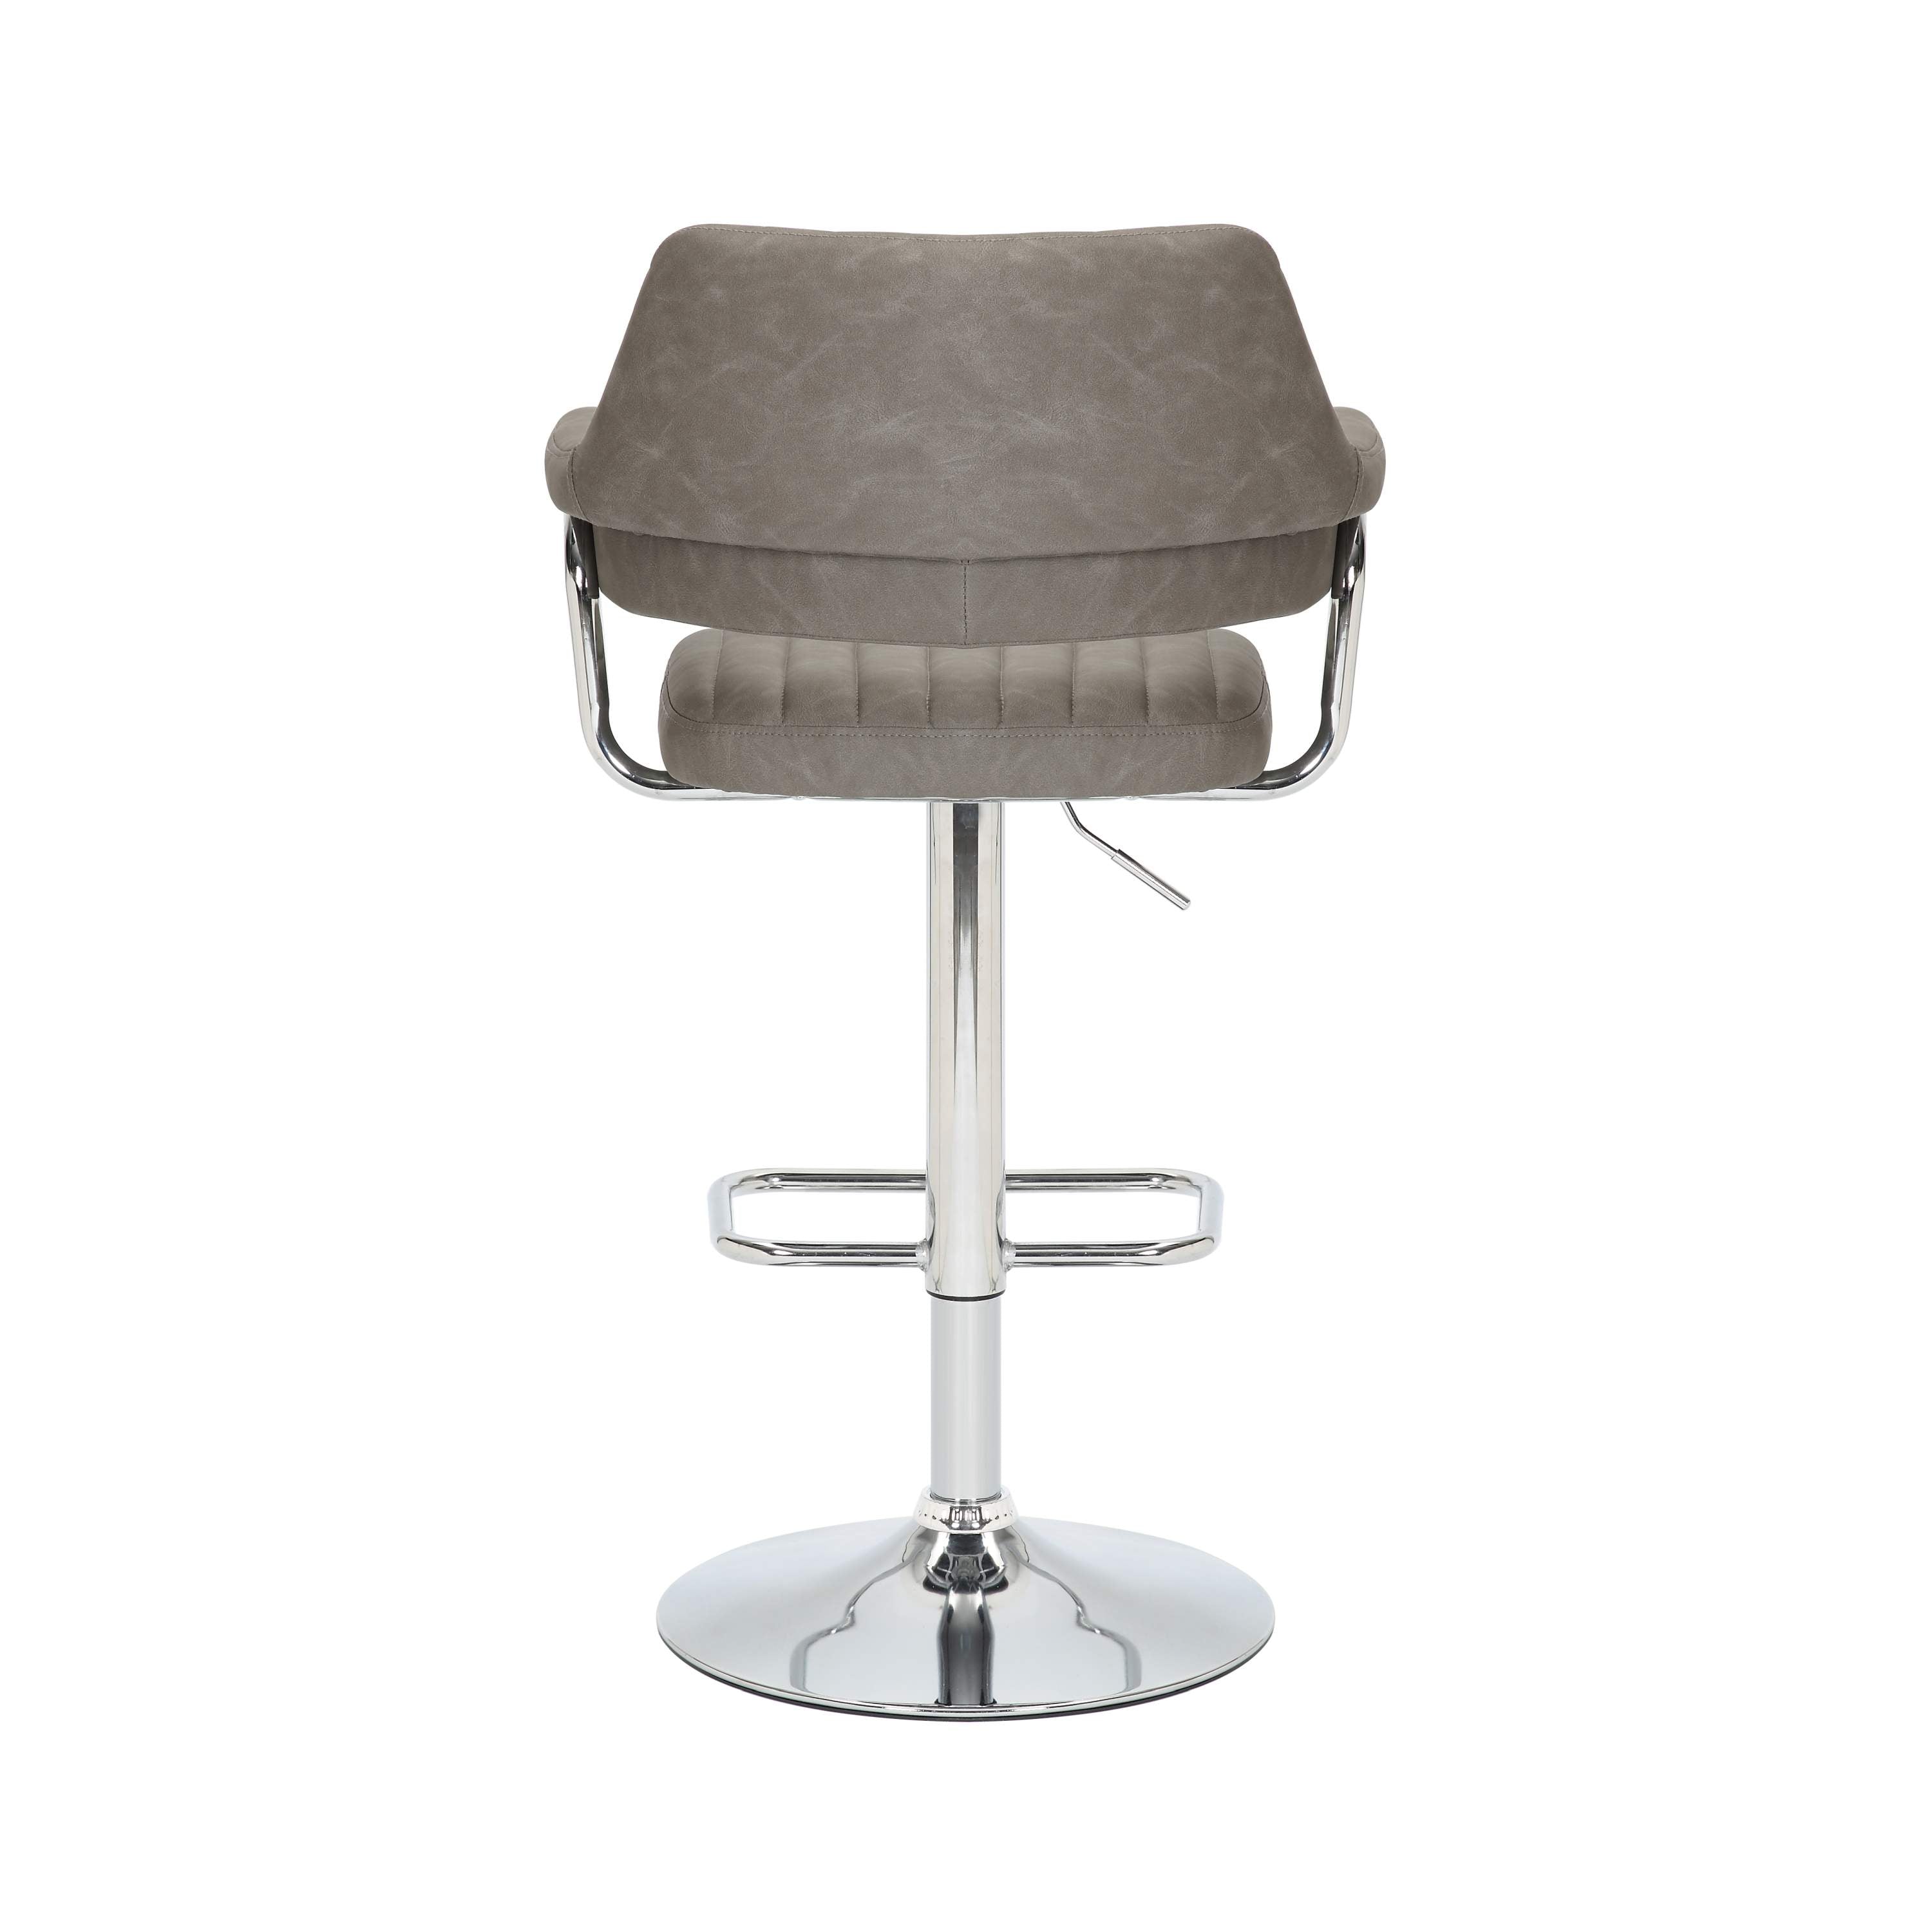 Pair of Charcoal Leather Effect Bar Stools